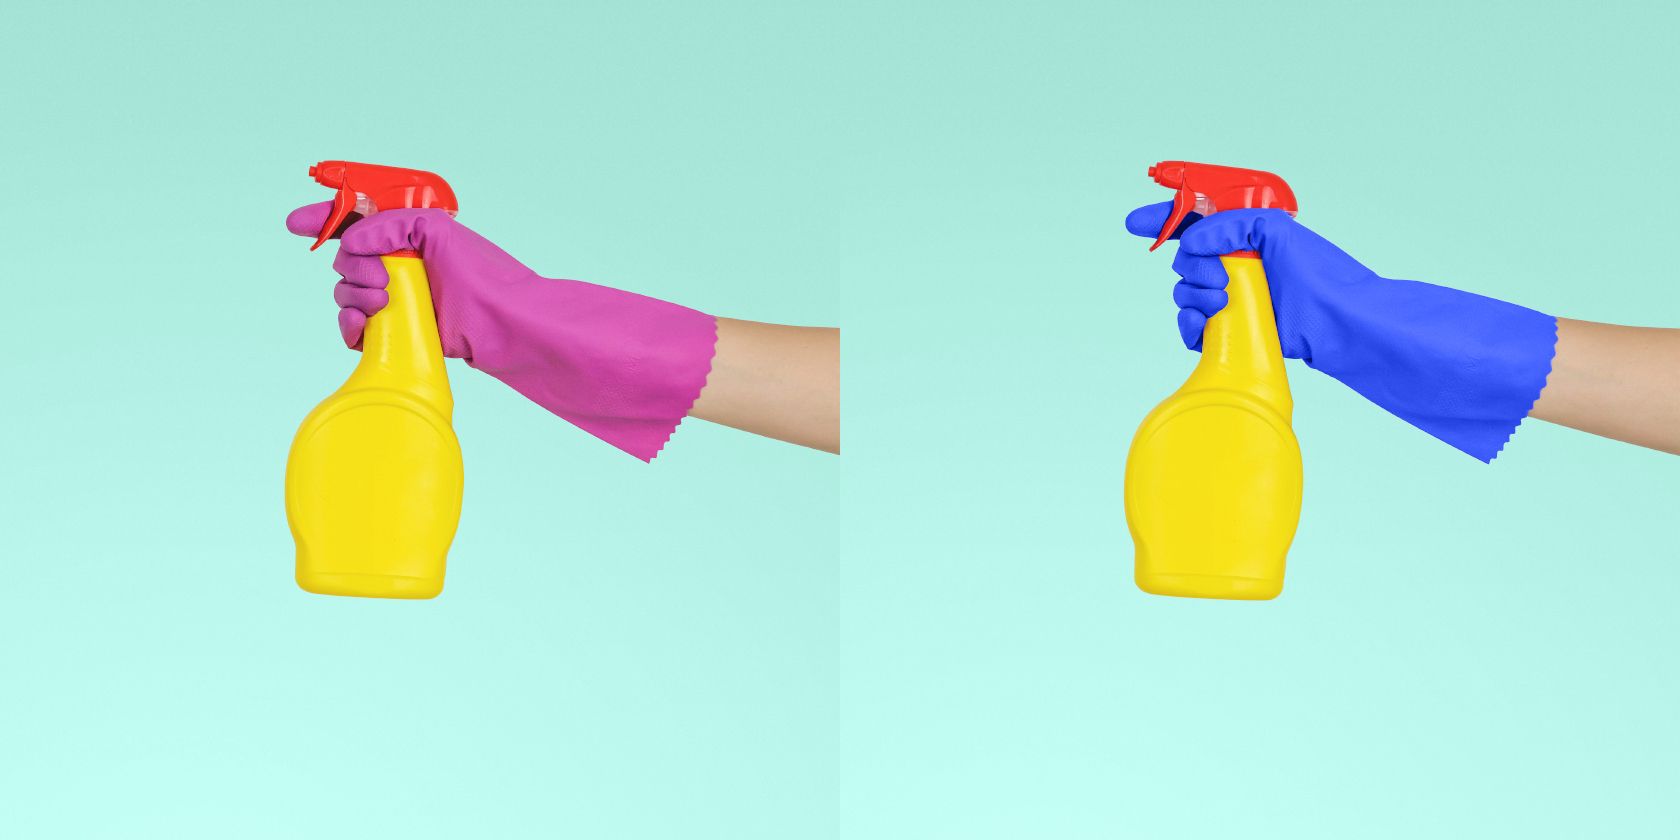 Before and after showing the color change of a rubber glove from pink to blue